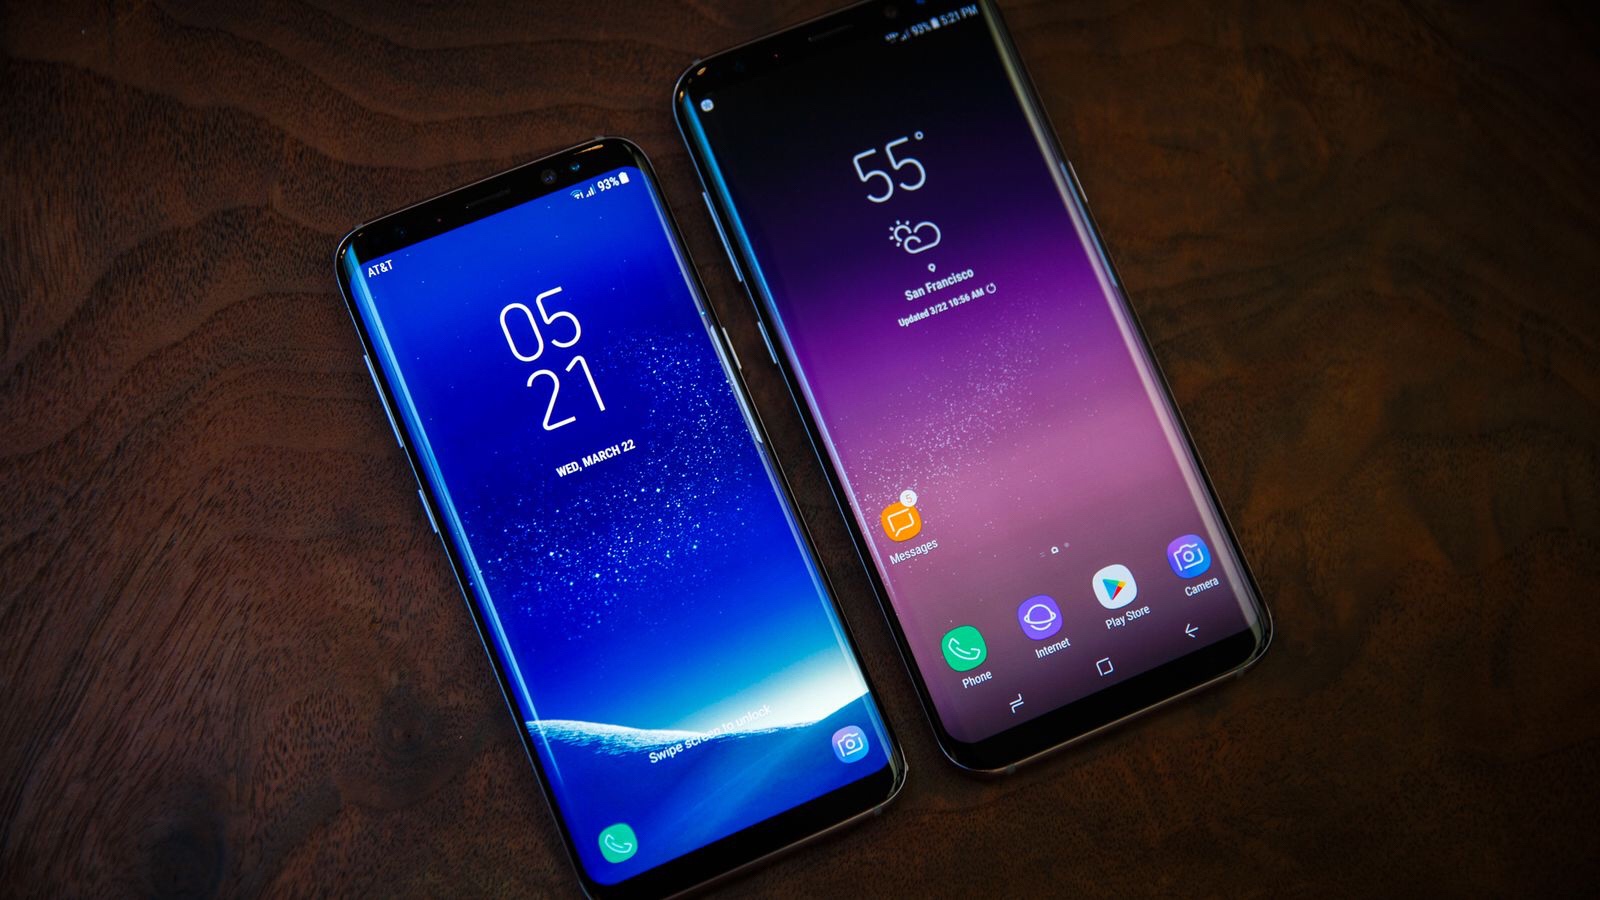 5 Things I like about the Samsung Galaxy S9 better than the iPhone X